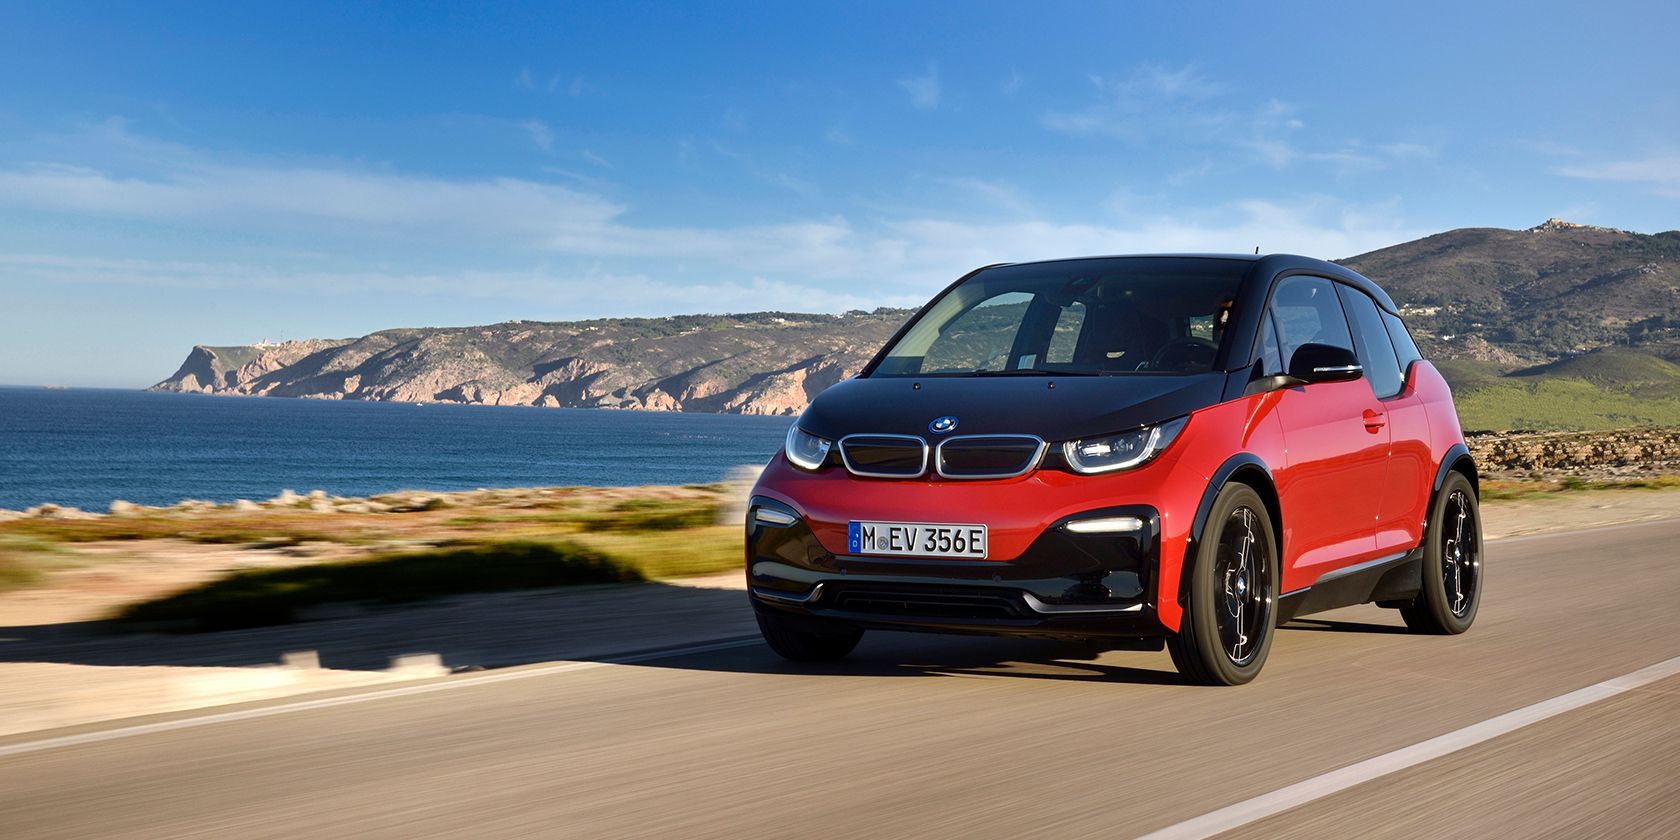 Driving the BMW i3 on the coast